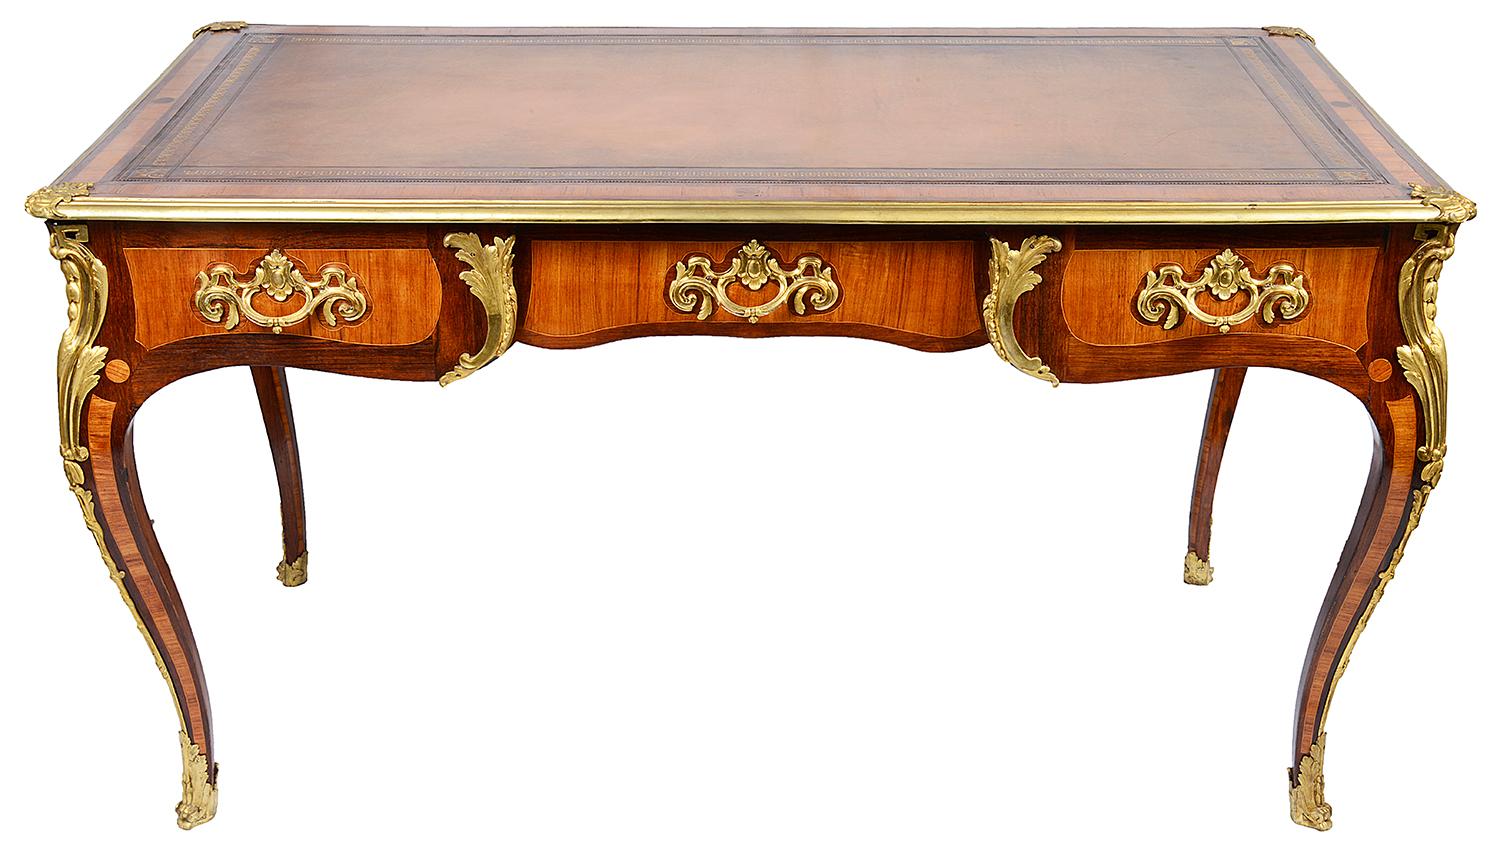 A good quality late 19th century French mahogany and satinwood bureau plat, having an inset leather with gilded tooling, three frieze drawer with oak linings, dummy drawers to the reverse, wonderful gilded ormolu Rococo handles, raised on elegant